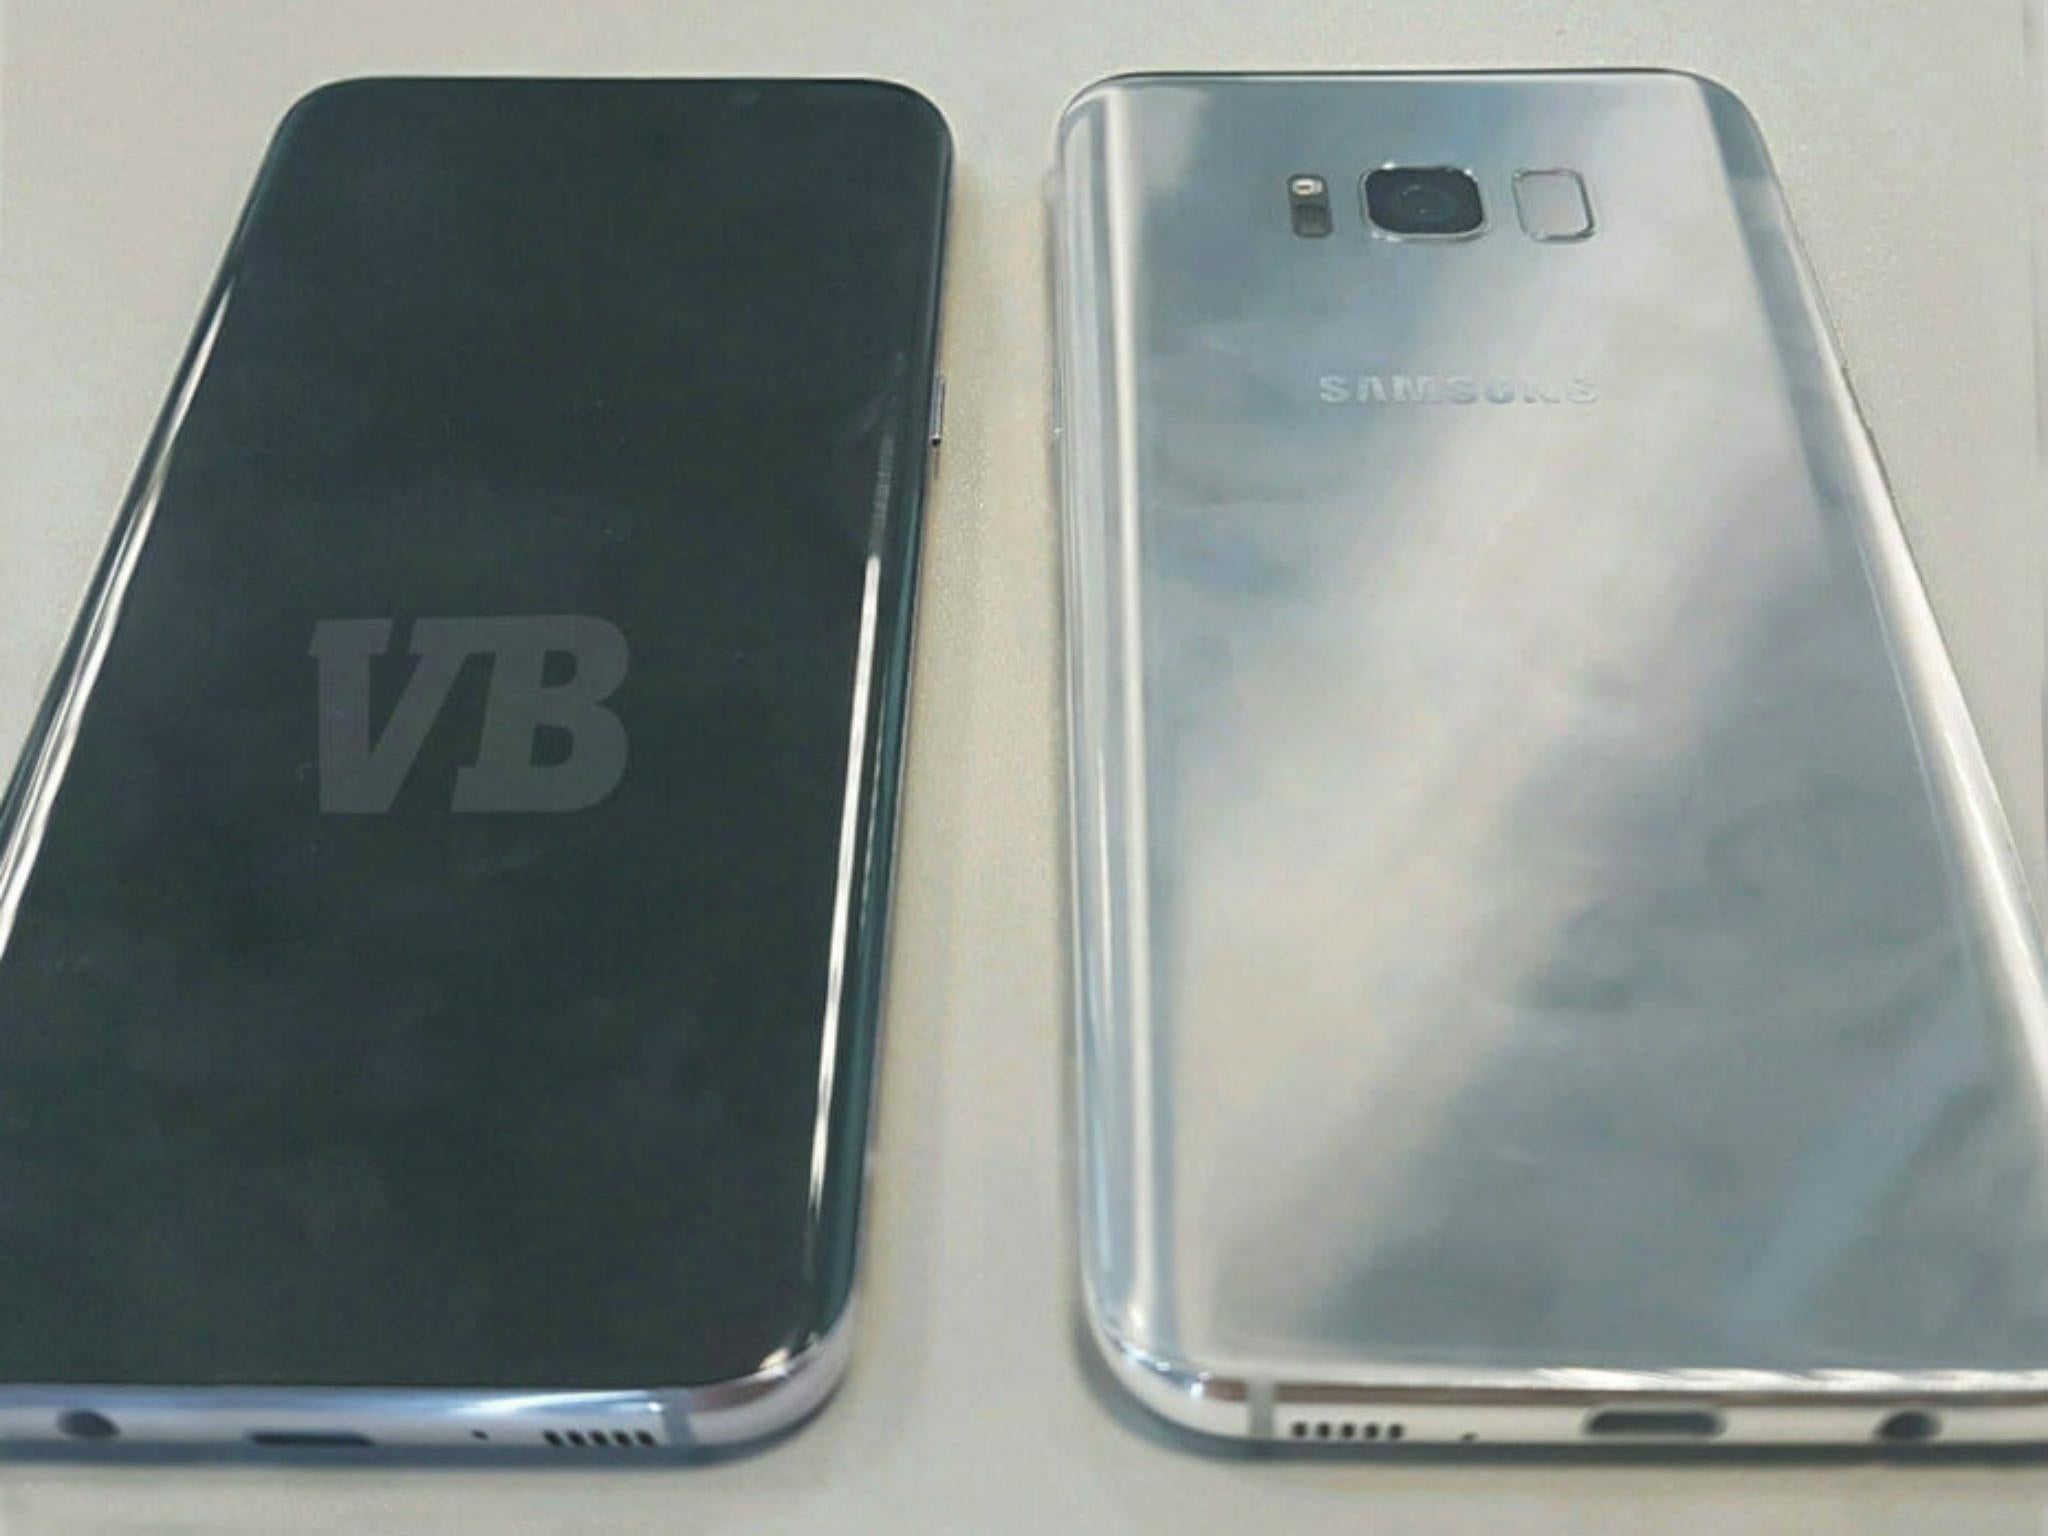 The Samsung Galaxy S8 is expected to be one of the most popular phones of the year